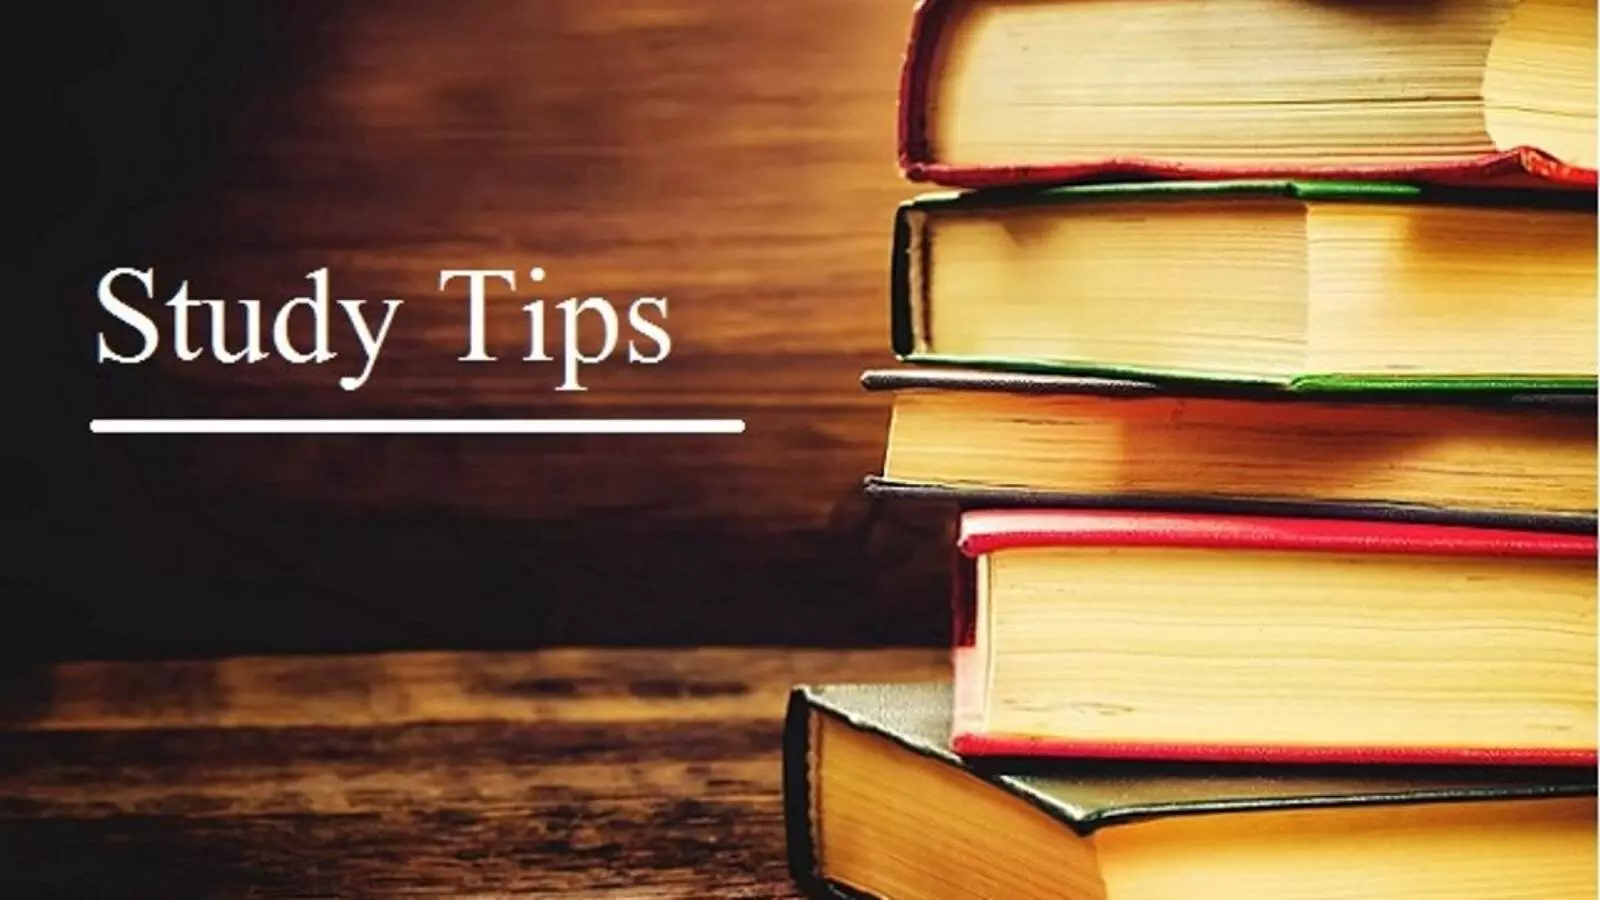 Toppers Study Tips for up board cbse board and other details